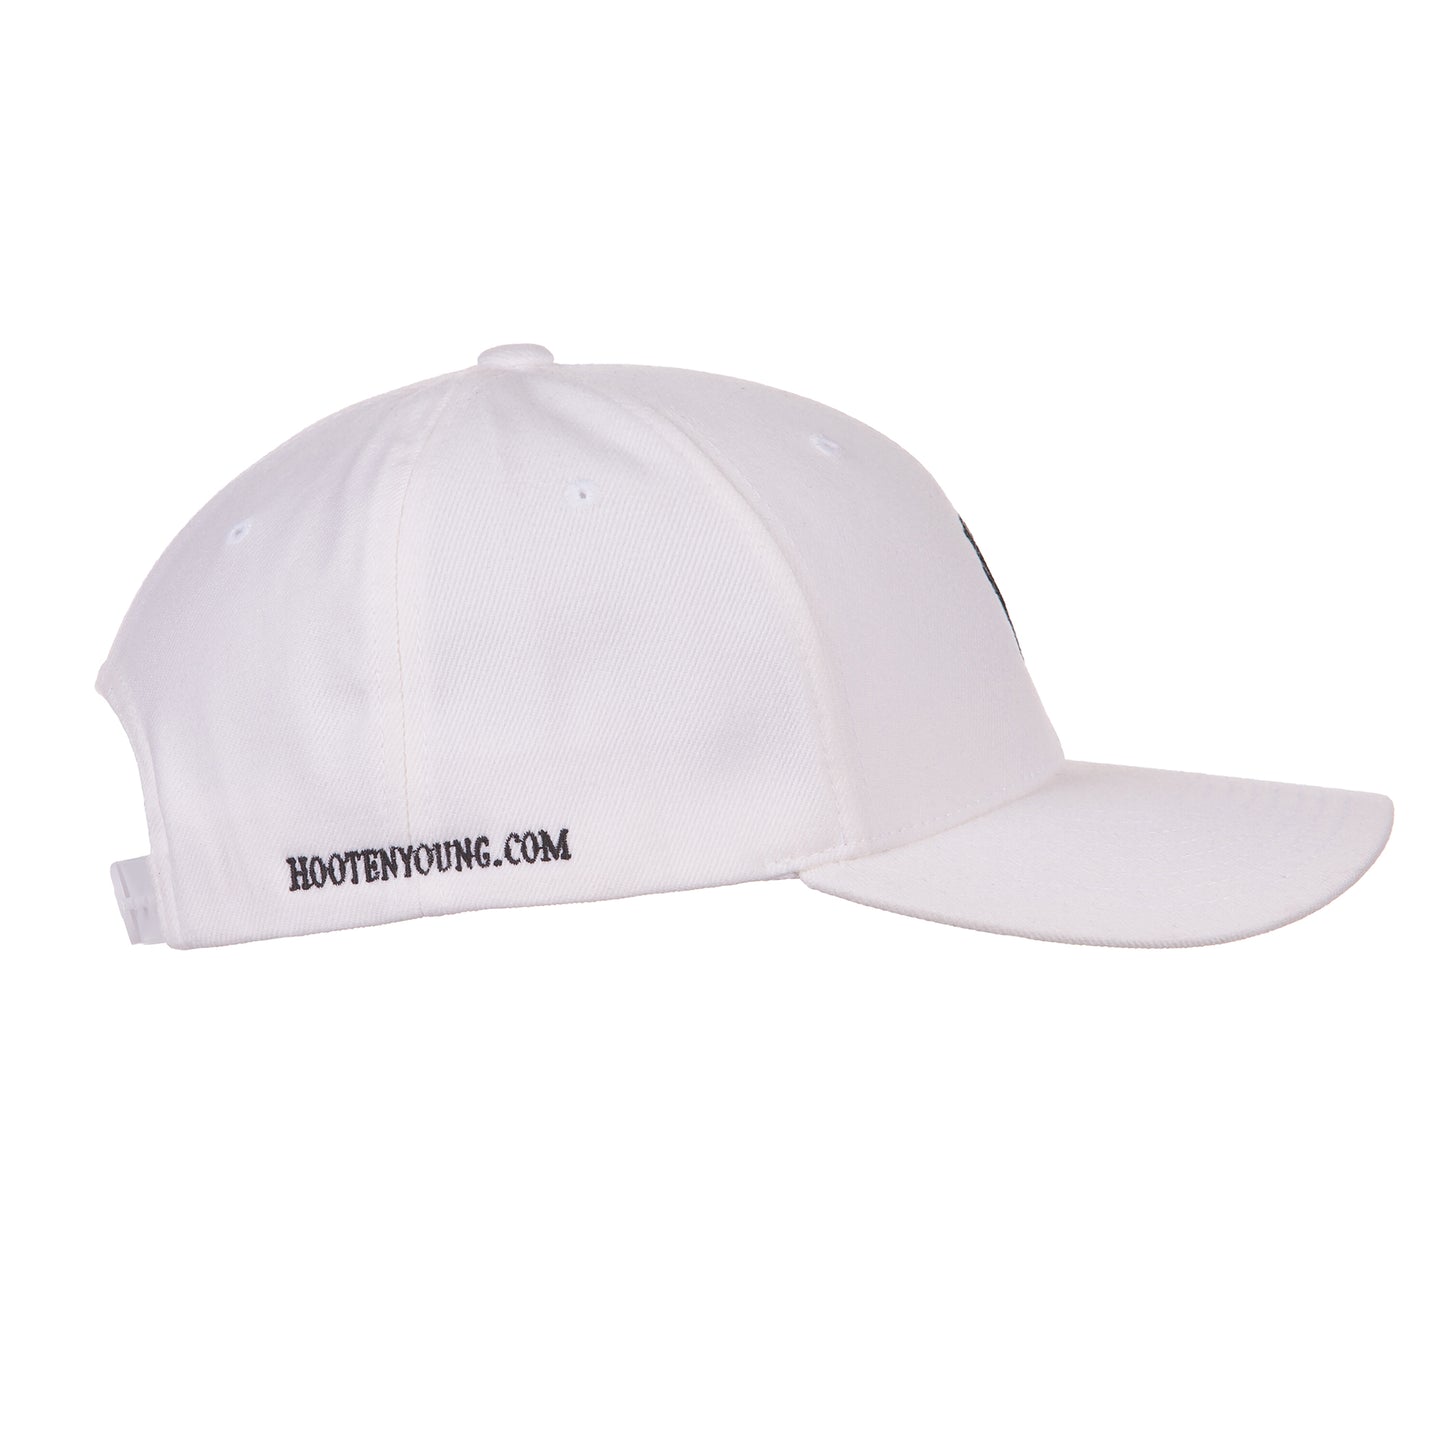 side view of white hat with "HOOTENYOUNG.COM" on side in black